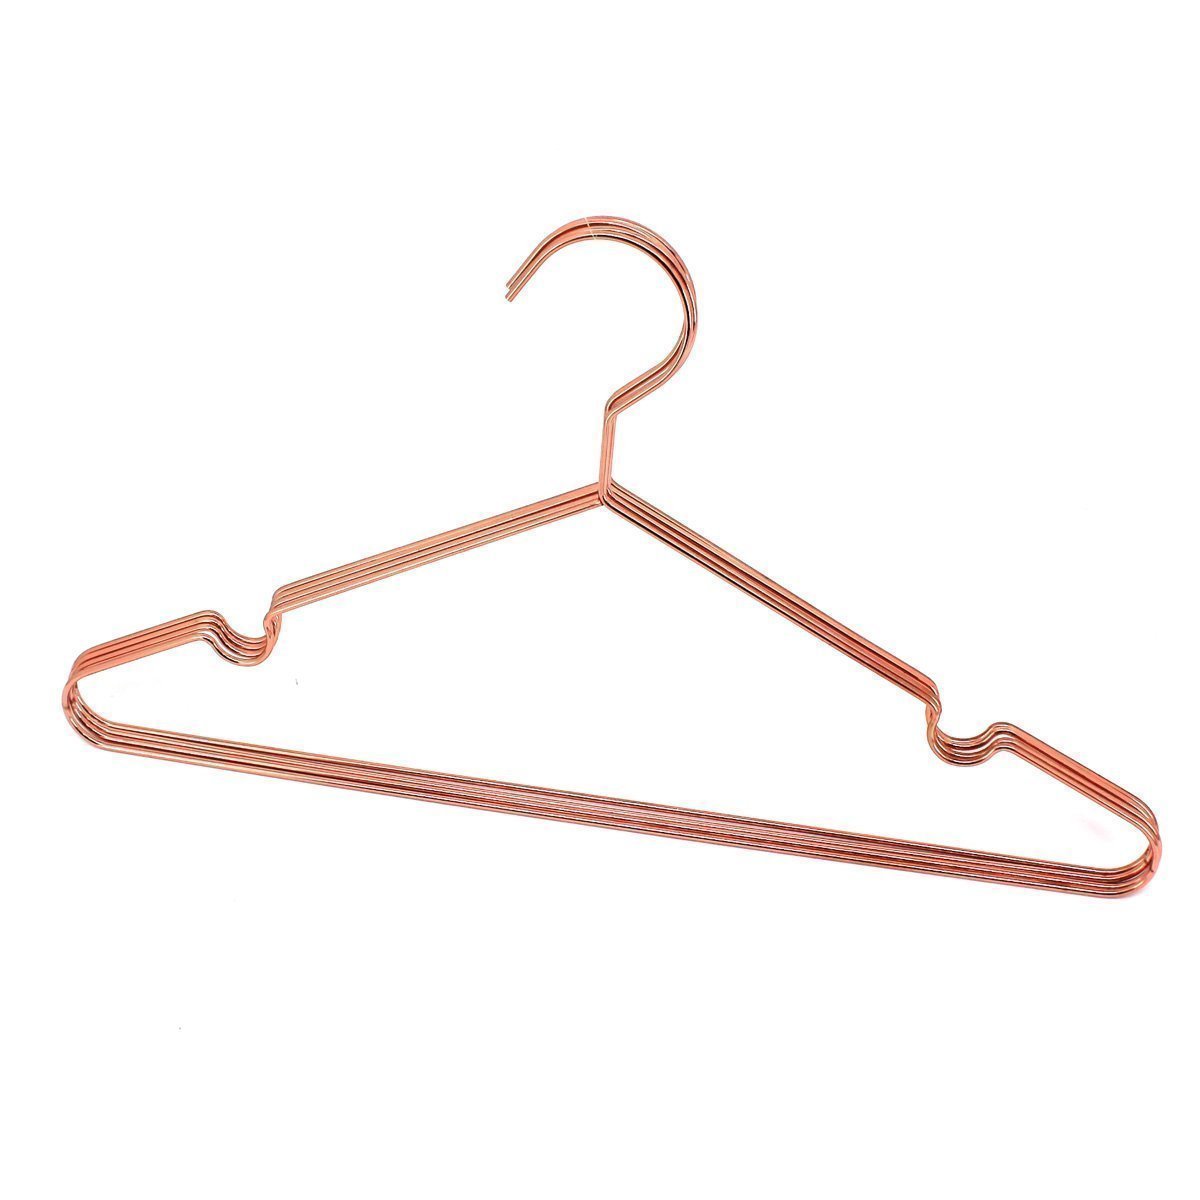 Try koobay 30pack 17 rose shiny copper clothes metal wire hanging hangers for shirts coat storage display